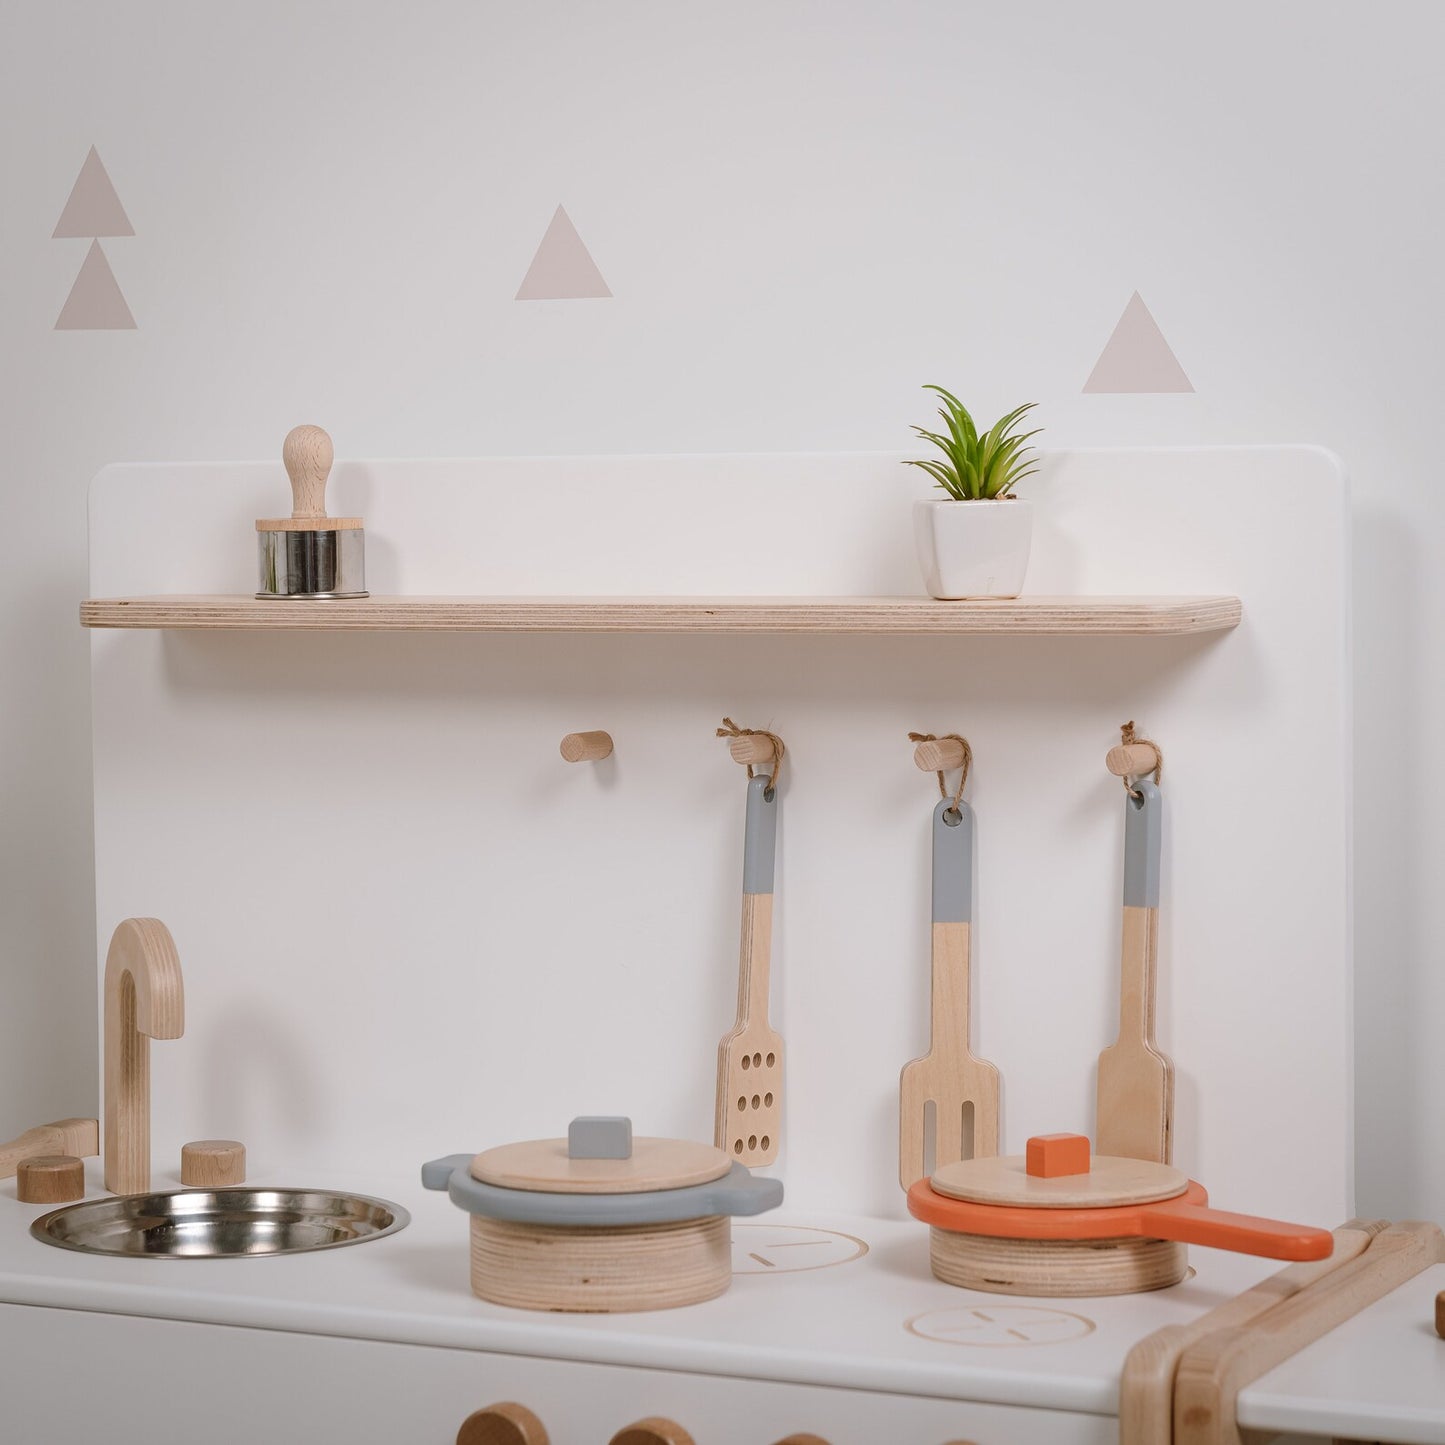 Toy kitchen combined with small shelving